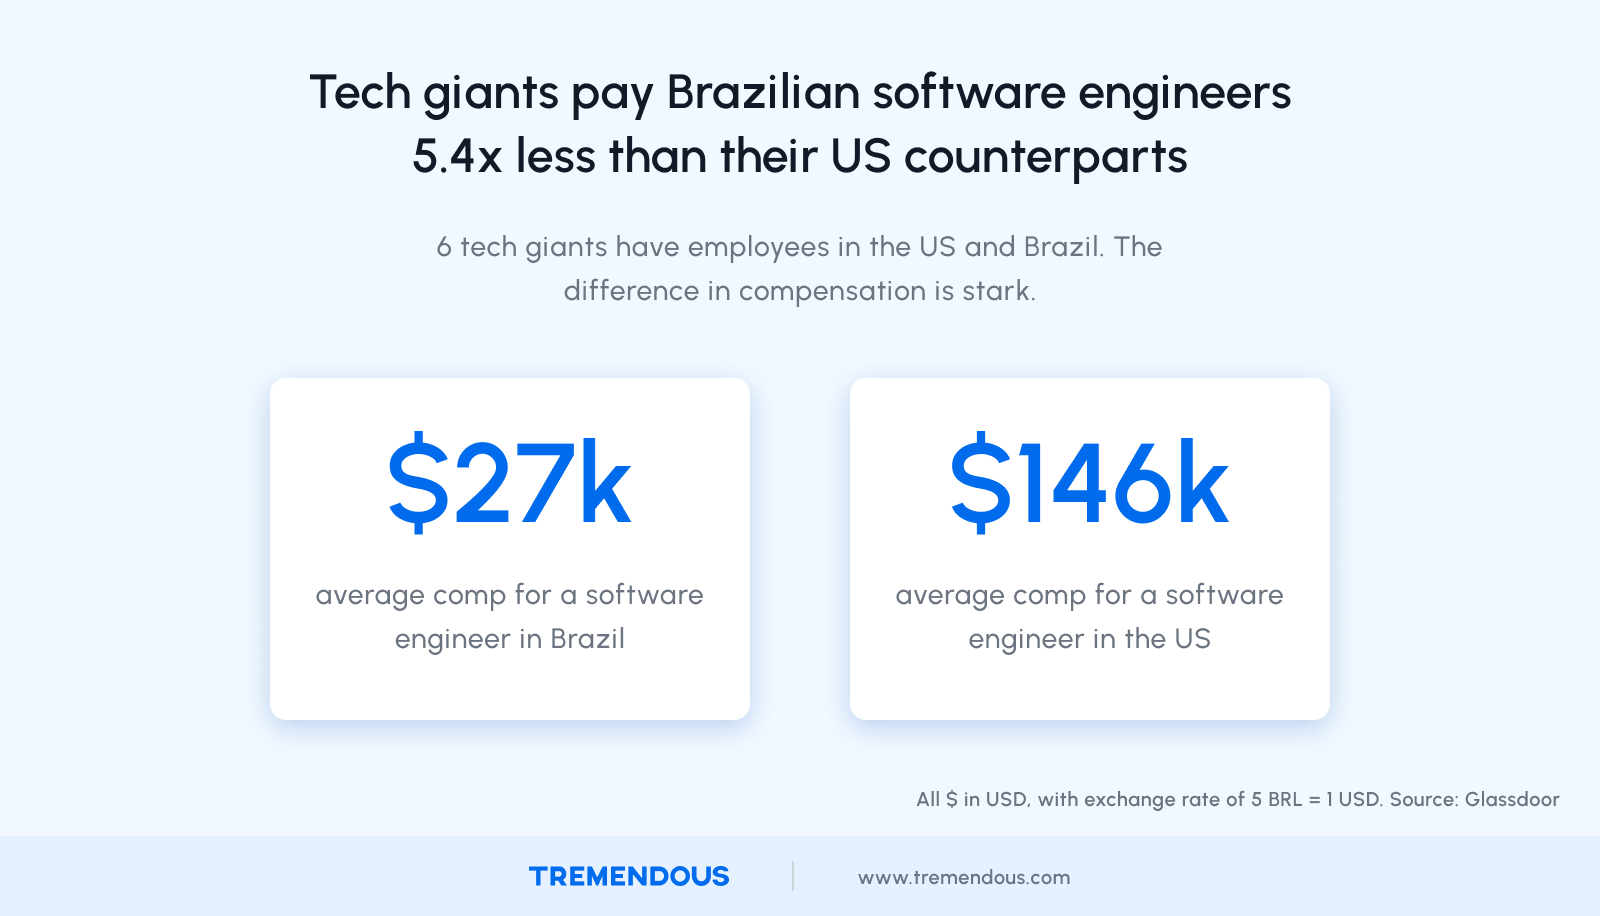 Tech giants pay Brazilian software engineers 5.4x less than their US counterparts